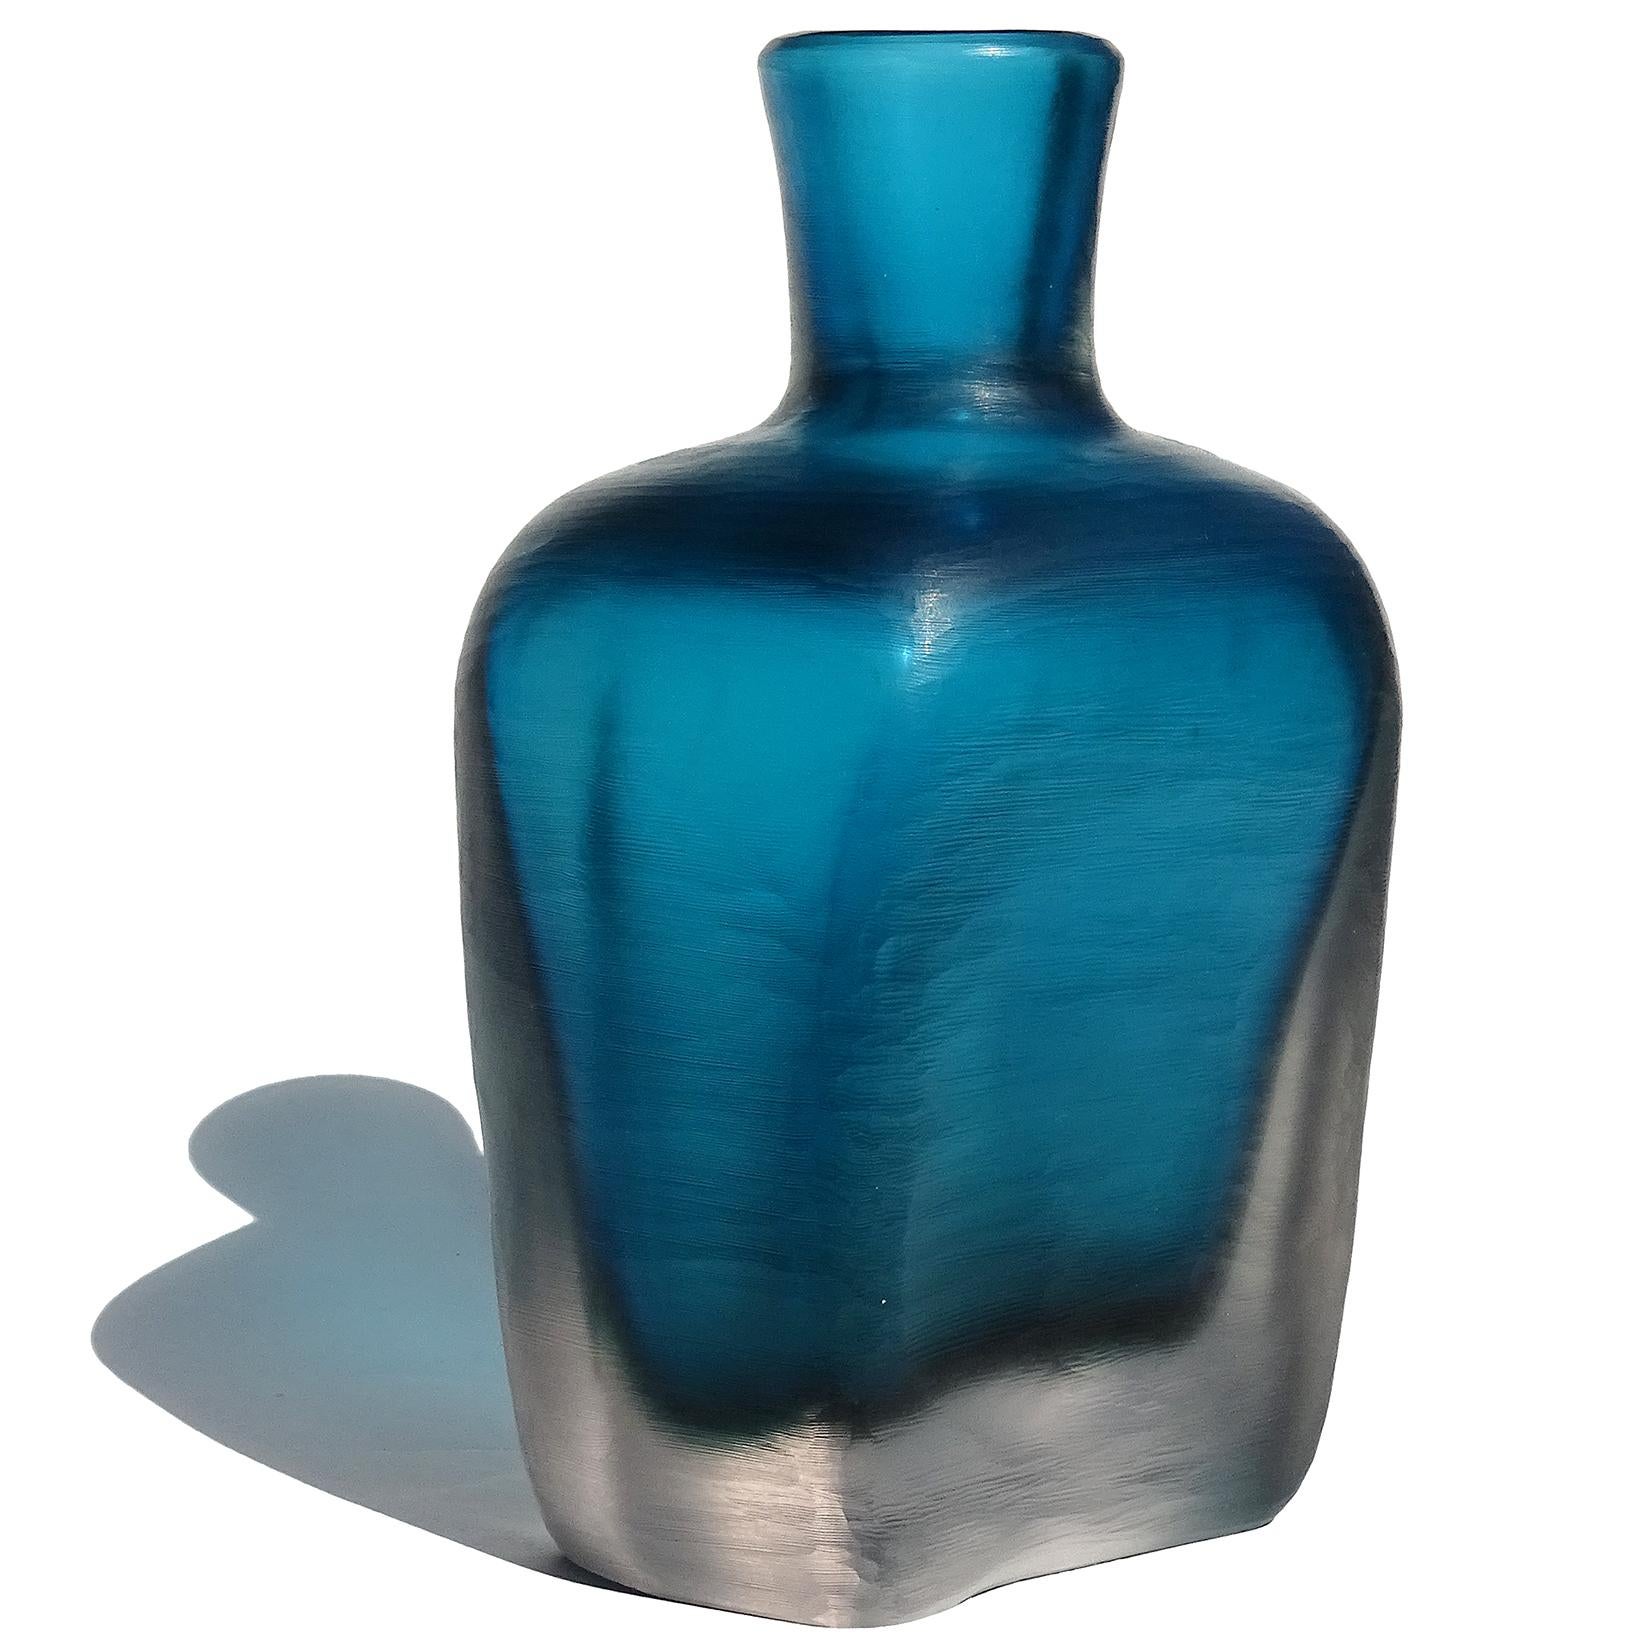 Beautiful Murano hand blown Sommerso navy blue Italian art glass flower vase. Documented to designer Paolo Venini for the Venini Company, in a 